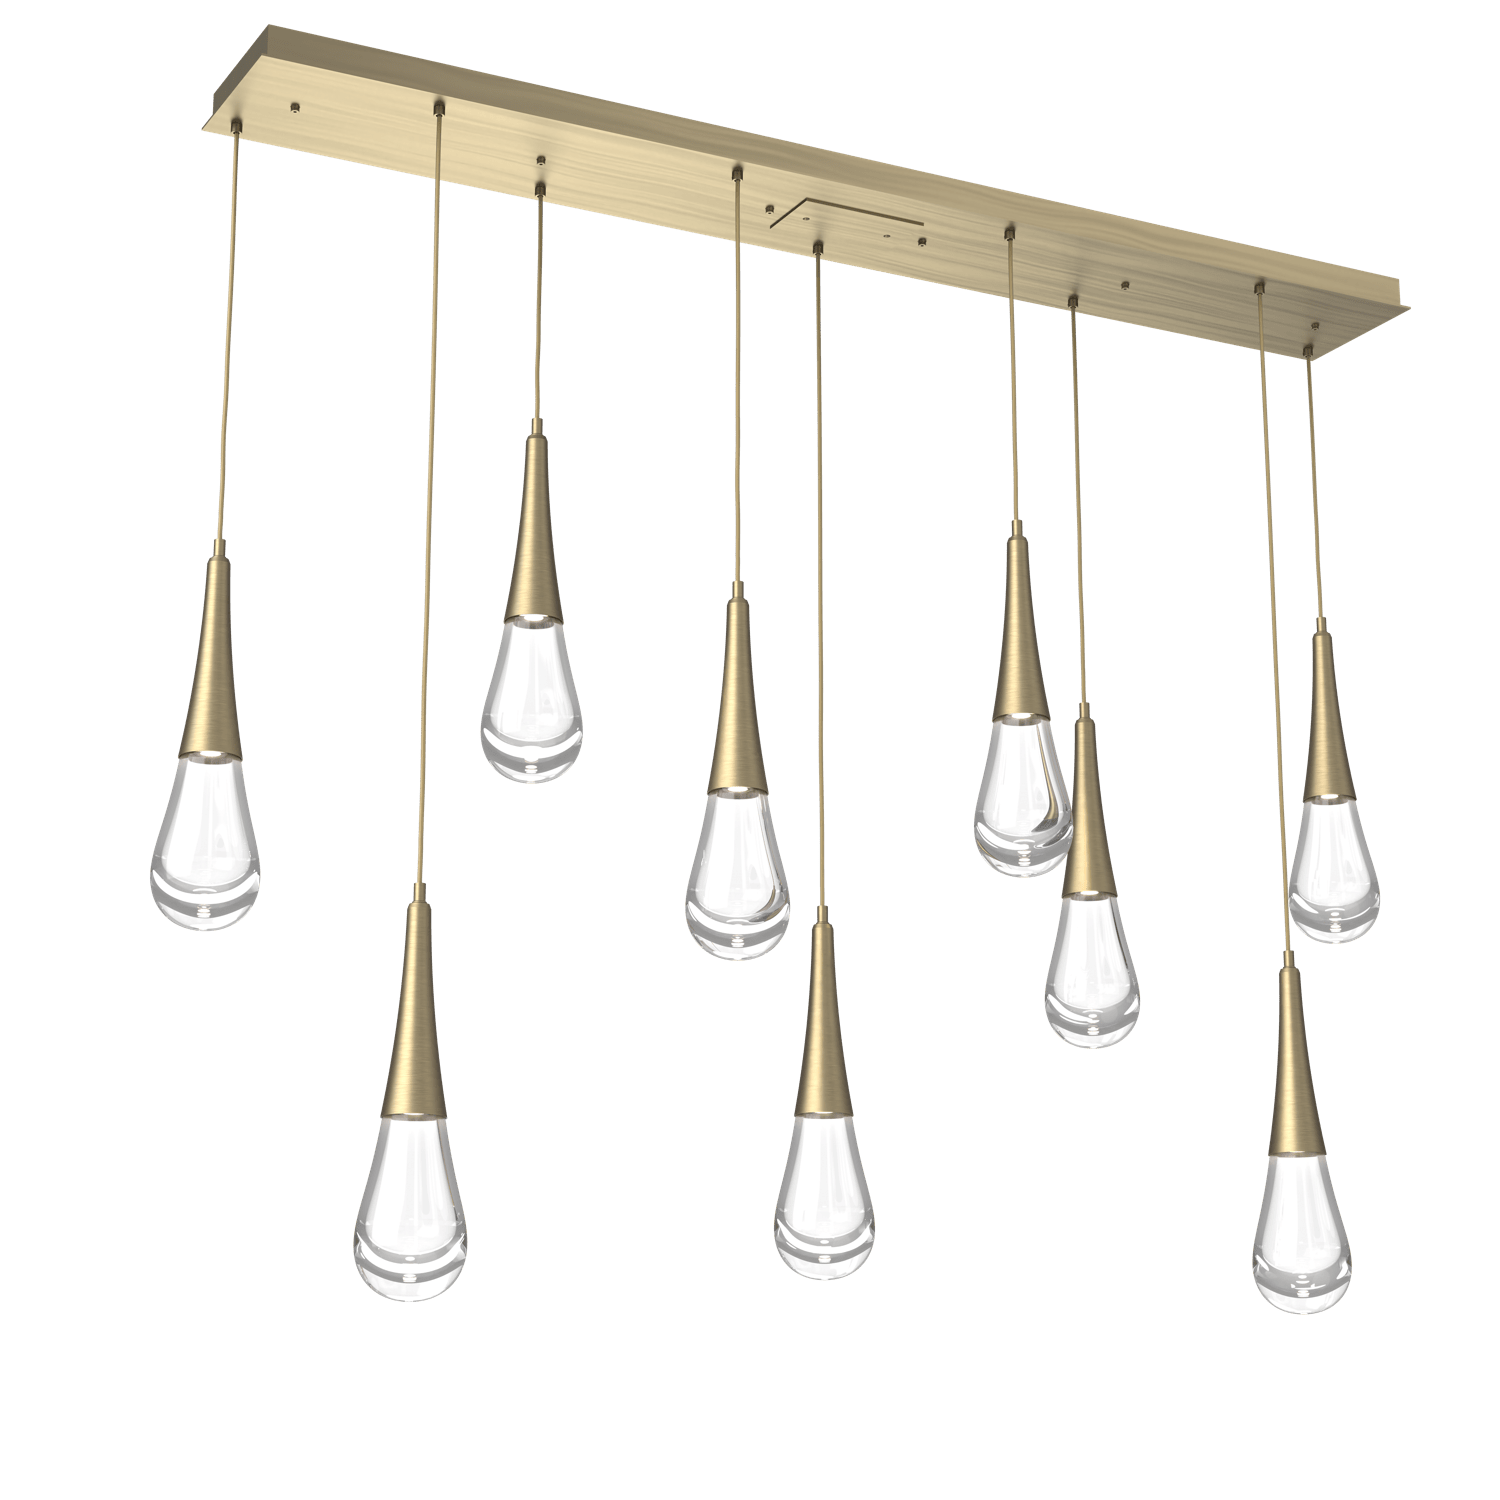 PLB0078-09-HB-Hammerton-Studio-Raindrop-9-light-linear-pendant-chandelier-with-heritage-brass-finish-and-clear-blown-glass-shades-and-LED-lamping